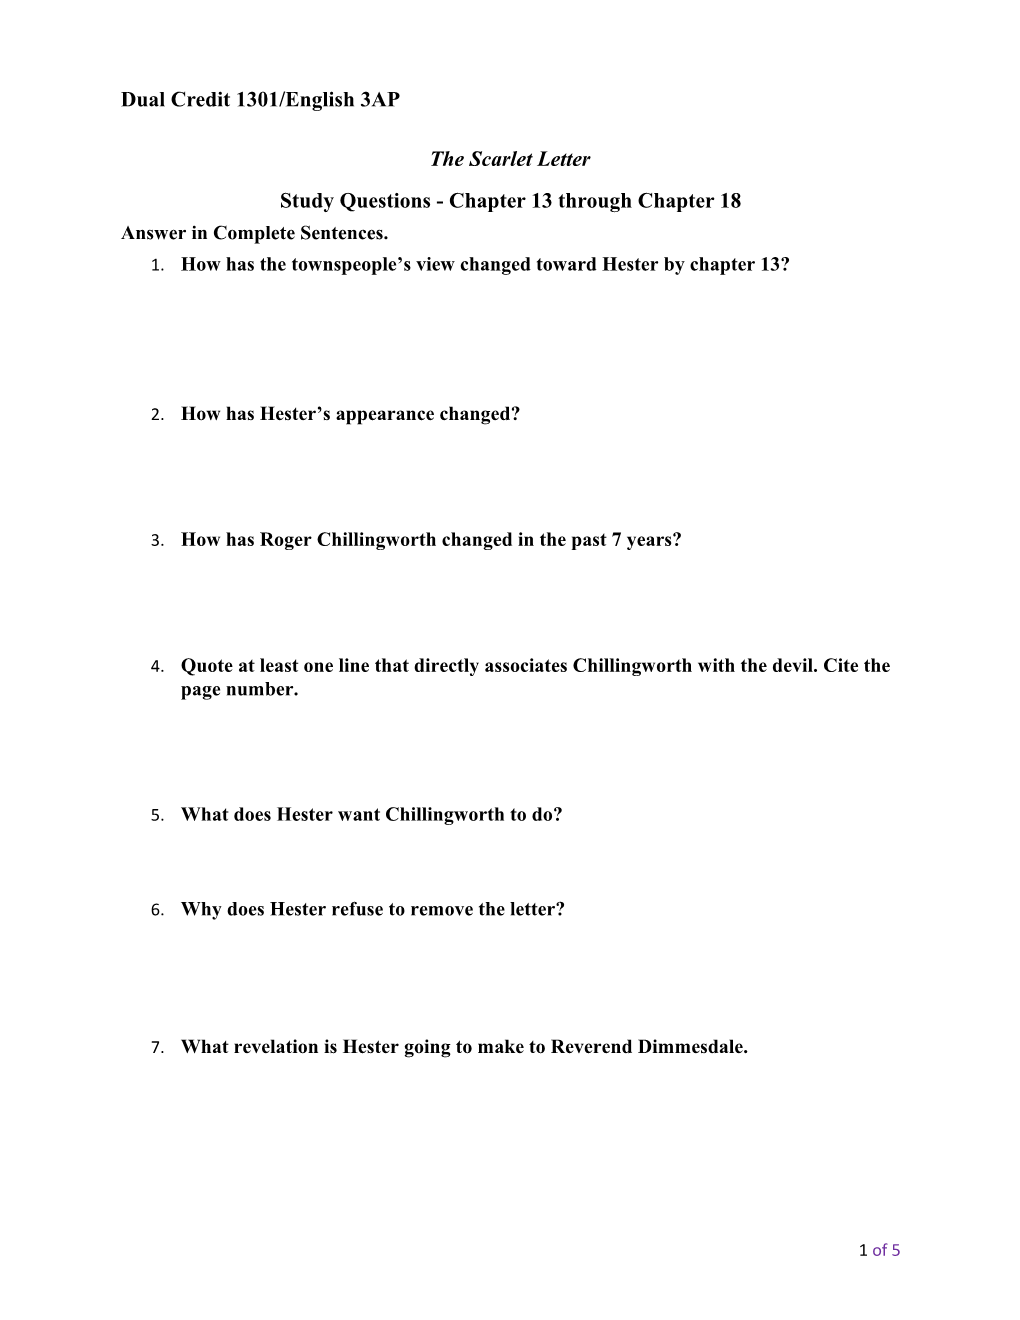 Study Questions - Chapter 13 Through Chapter 18